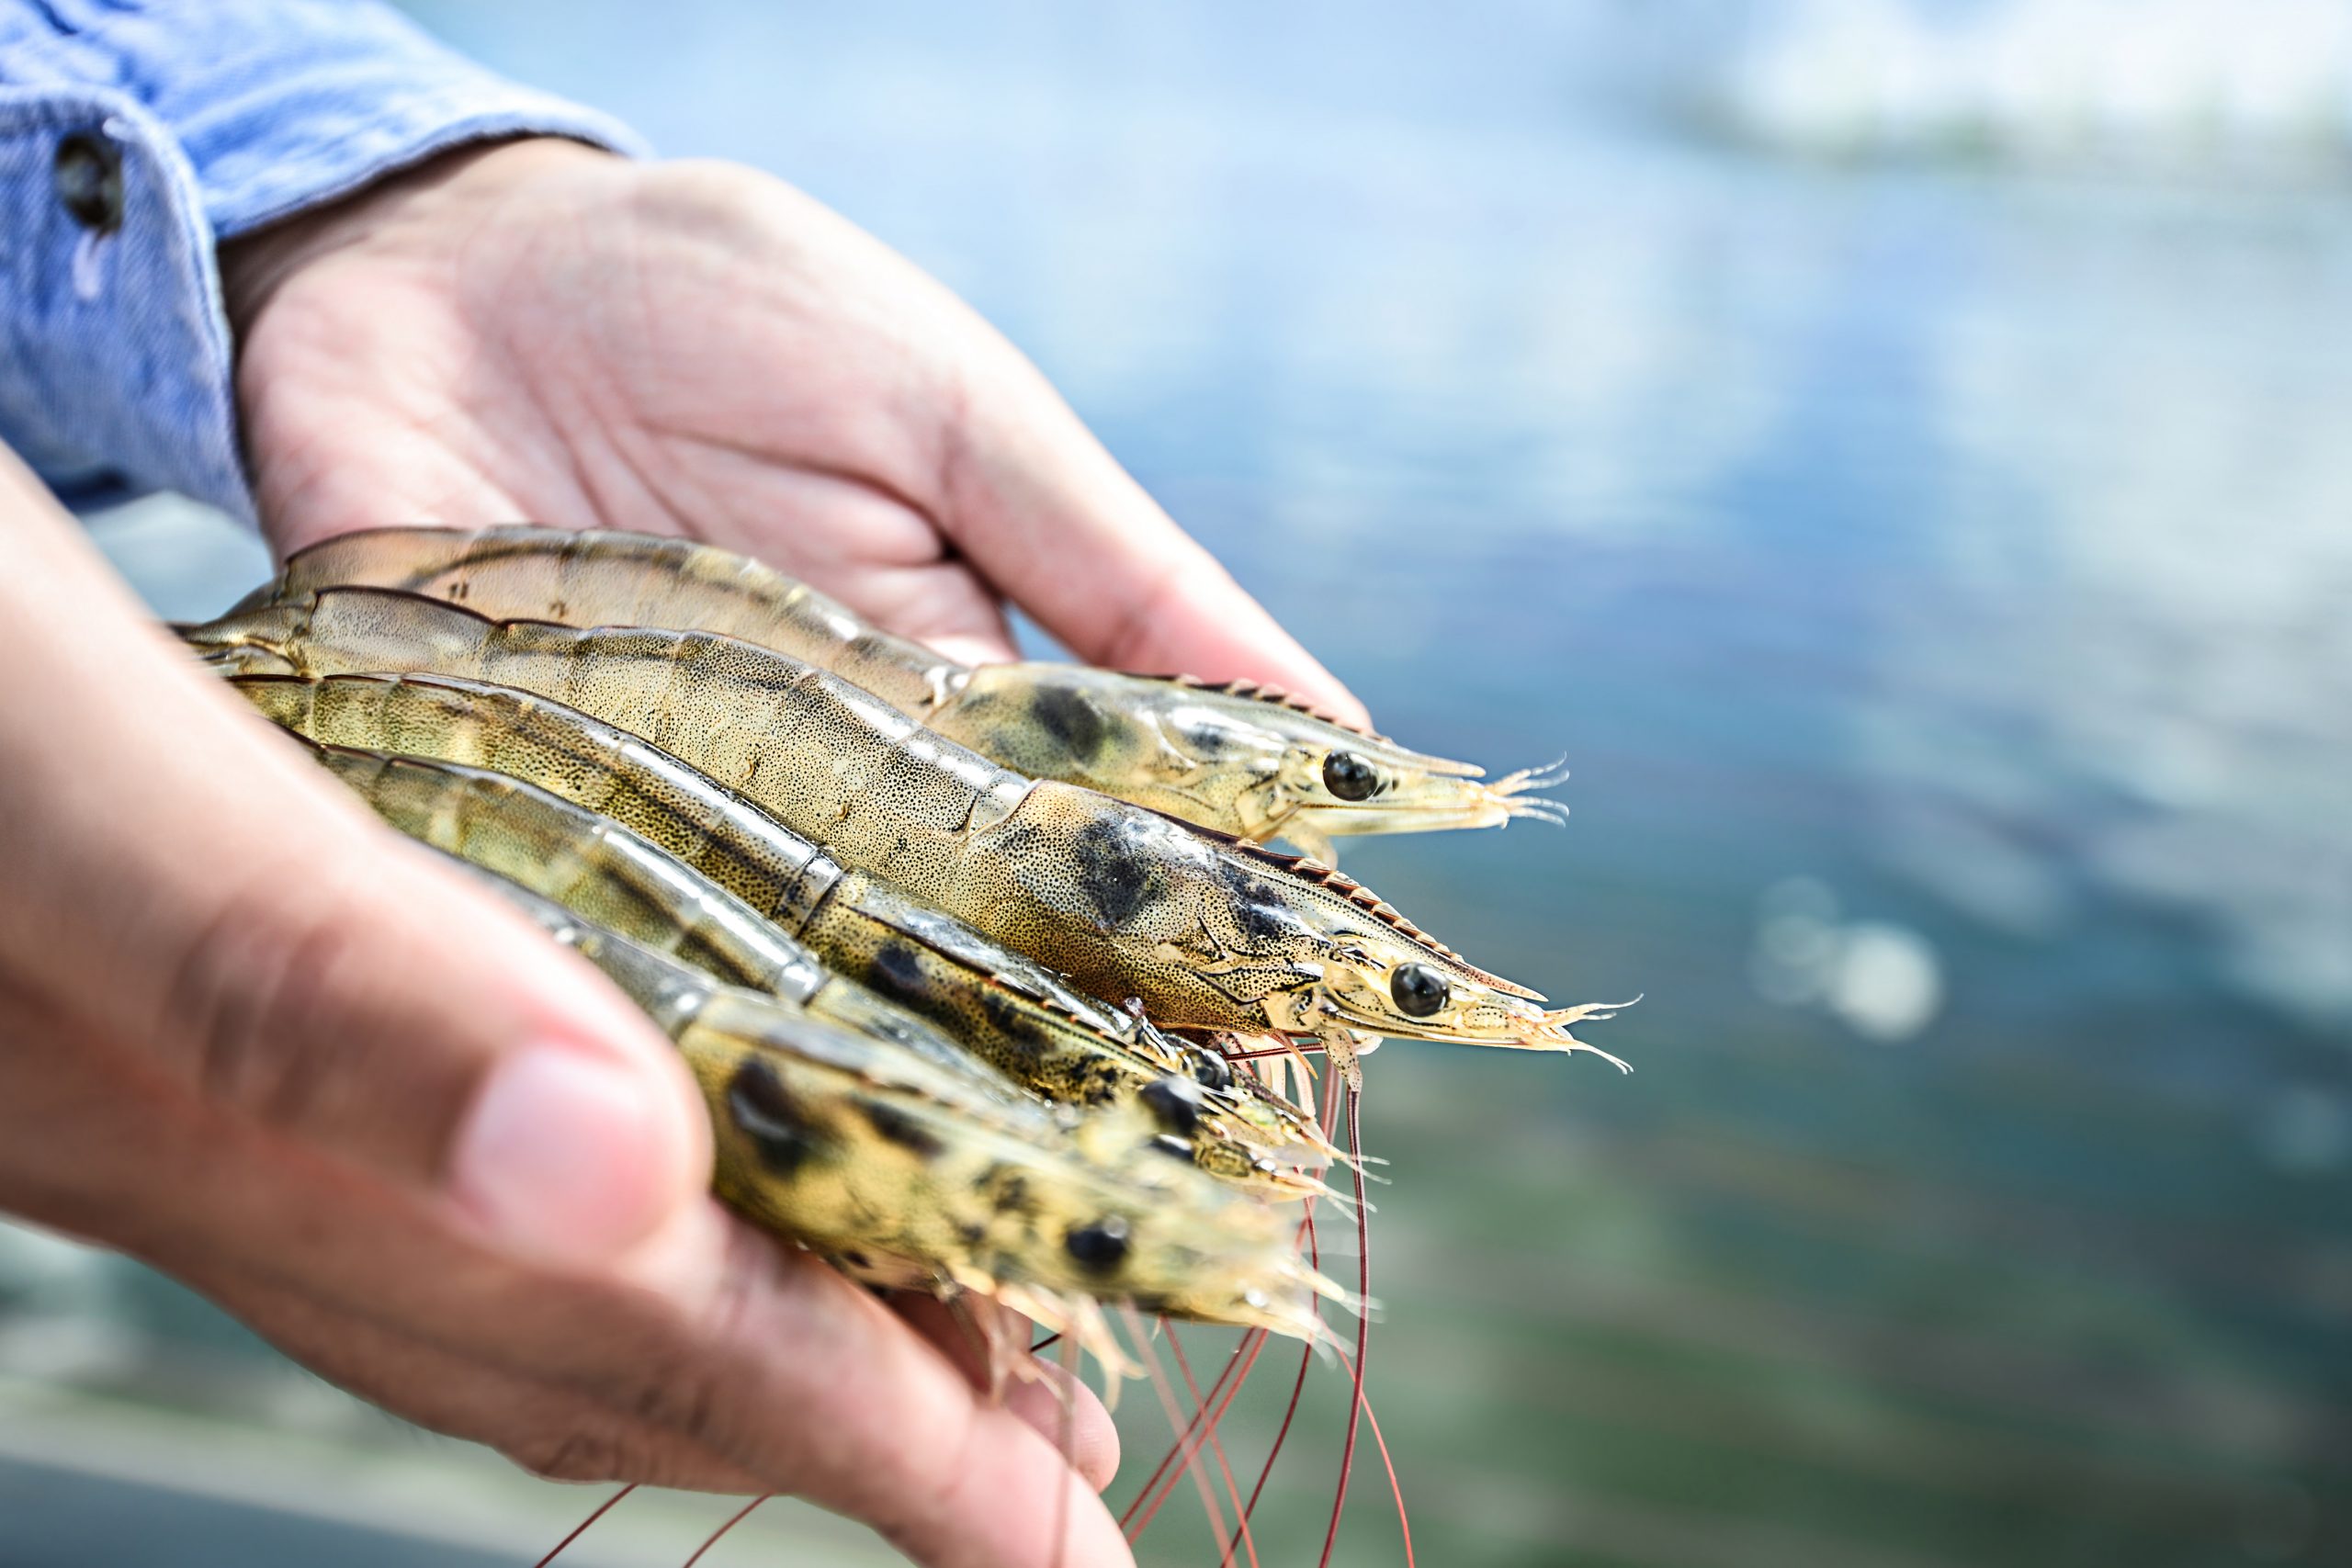 Insect meal for shrimp: New insights . Photo: Shutterstock